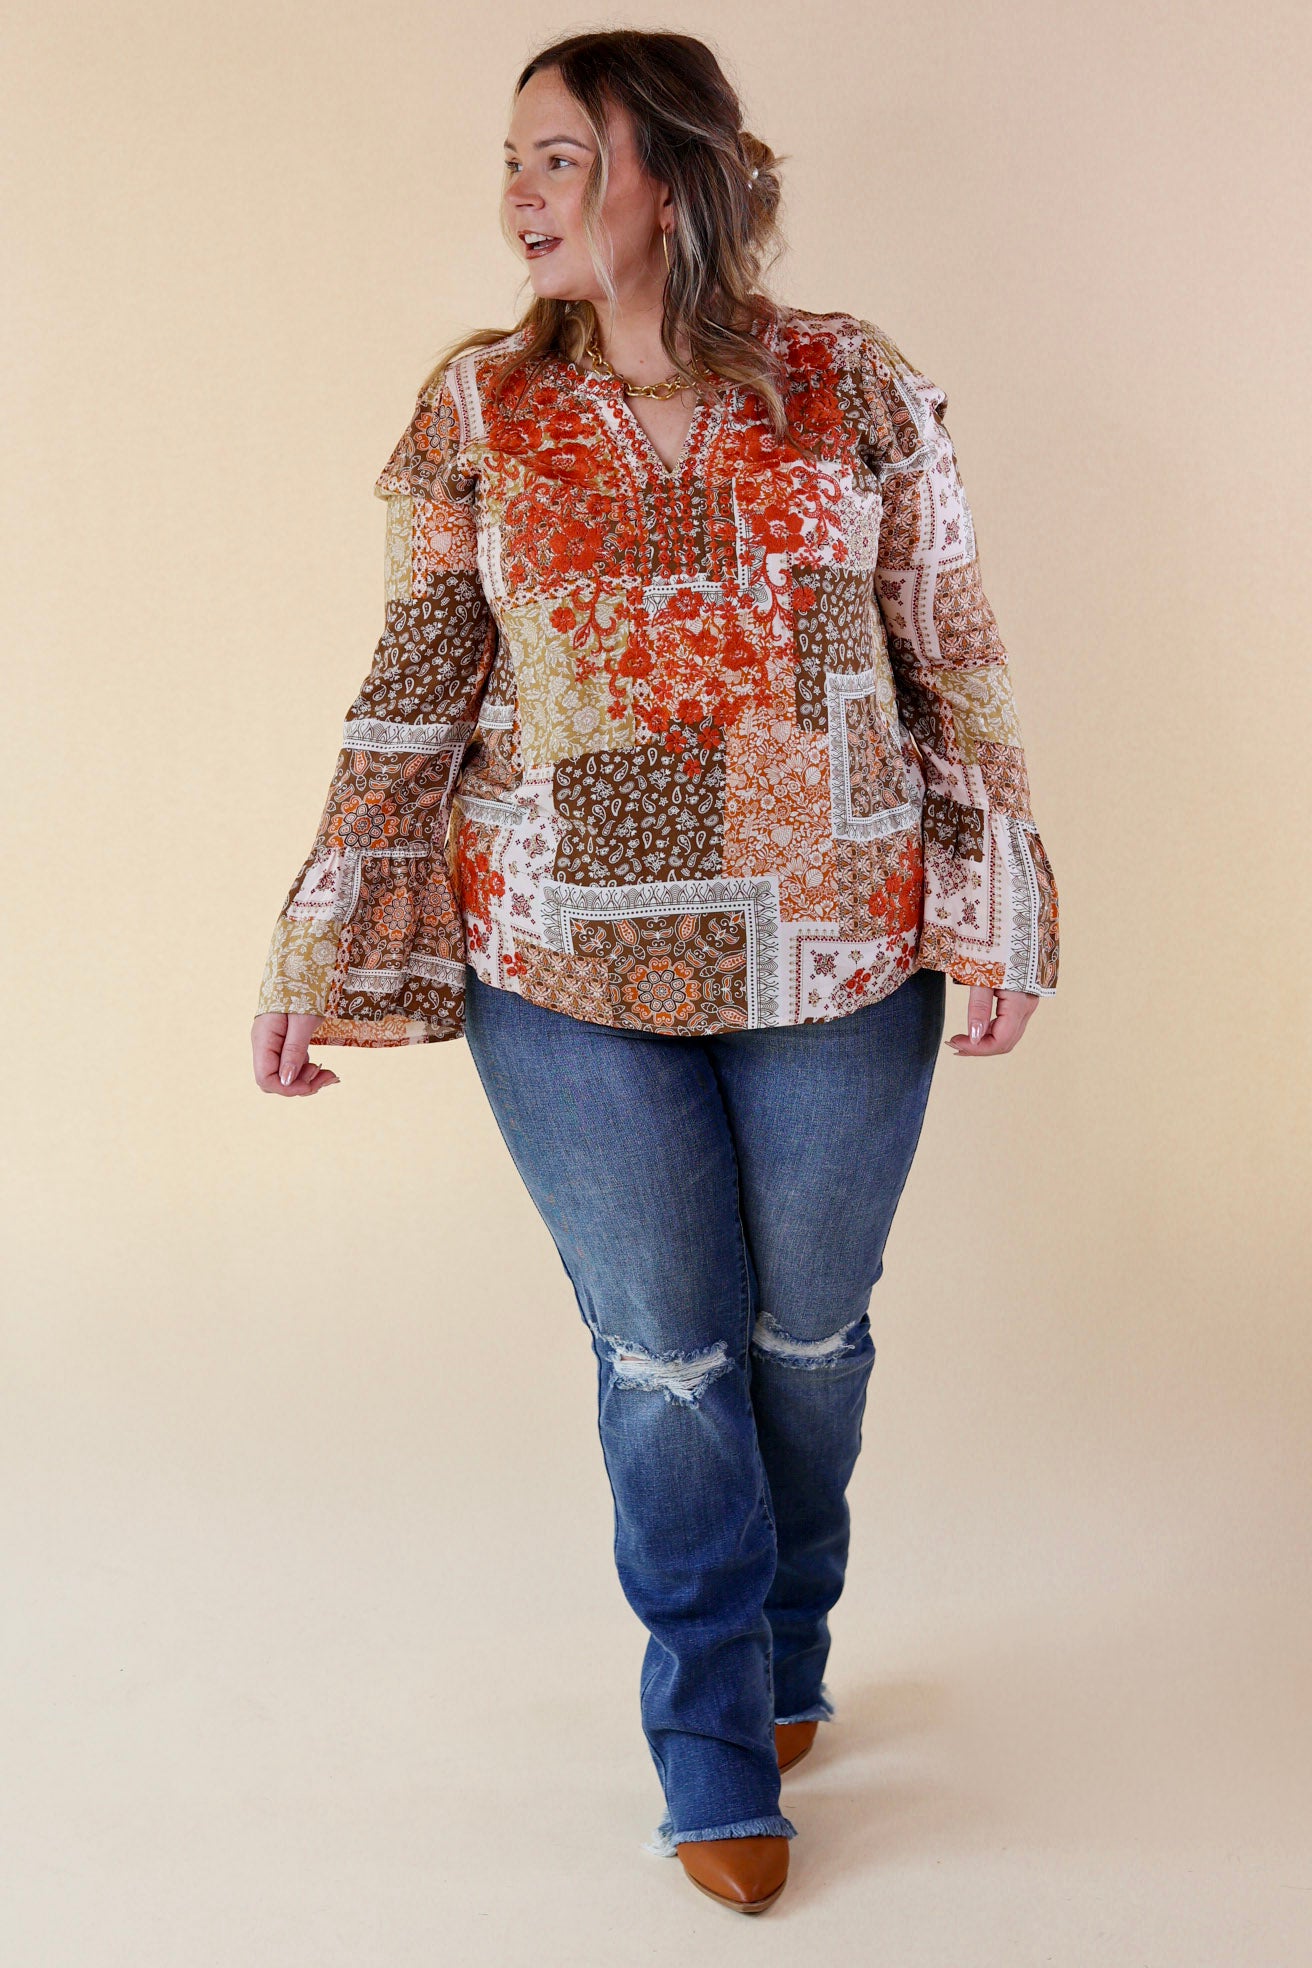 Everything Counts Floral Embroidered Top in Olive Green Mix - Giddy Up Glamour Boutique